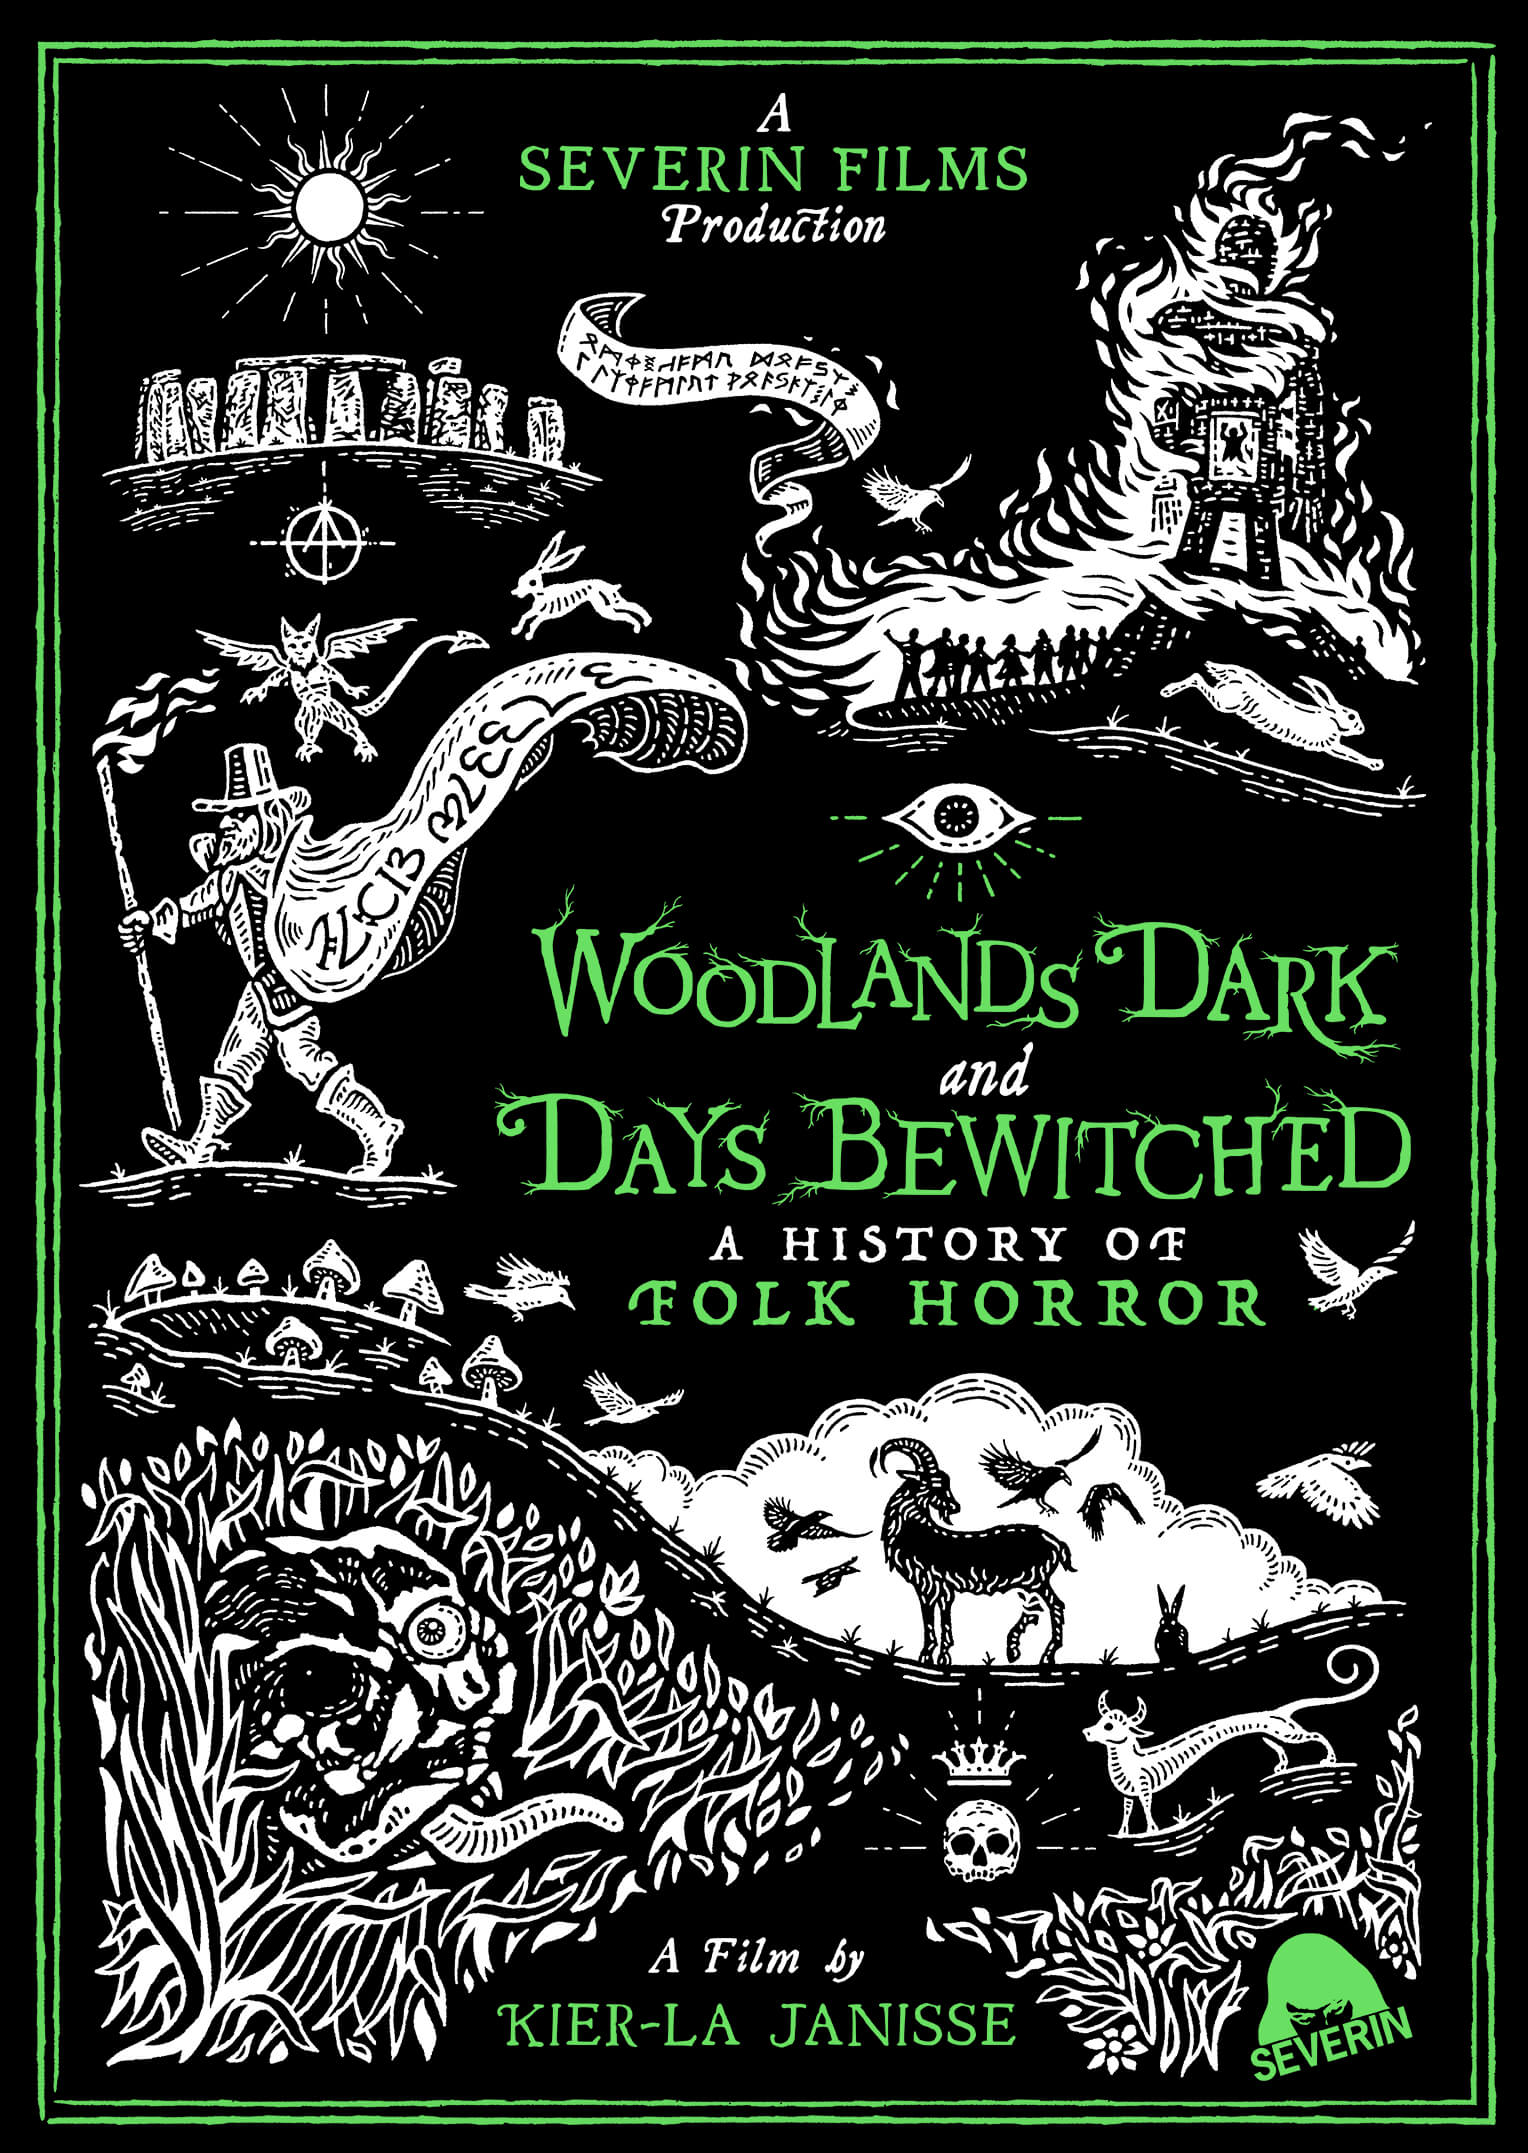 WOODLANDS DARK AND DAYS BEWITCHED: A HISTORY OF FOLK HORROR DVD